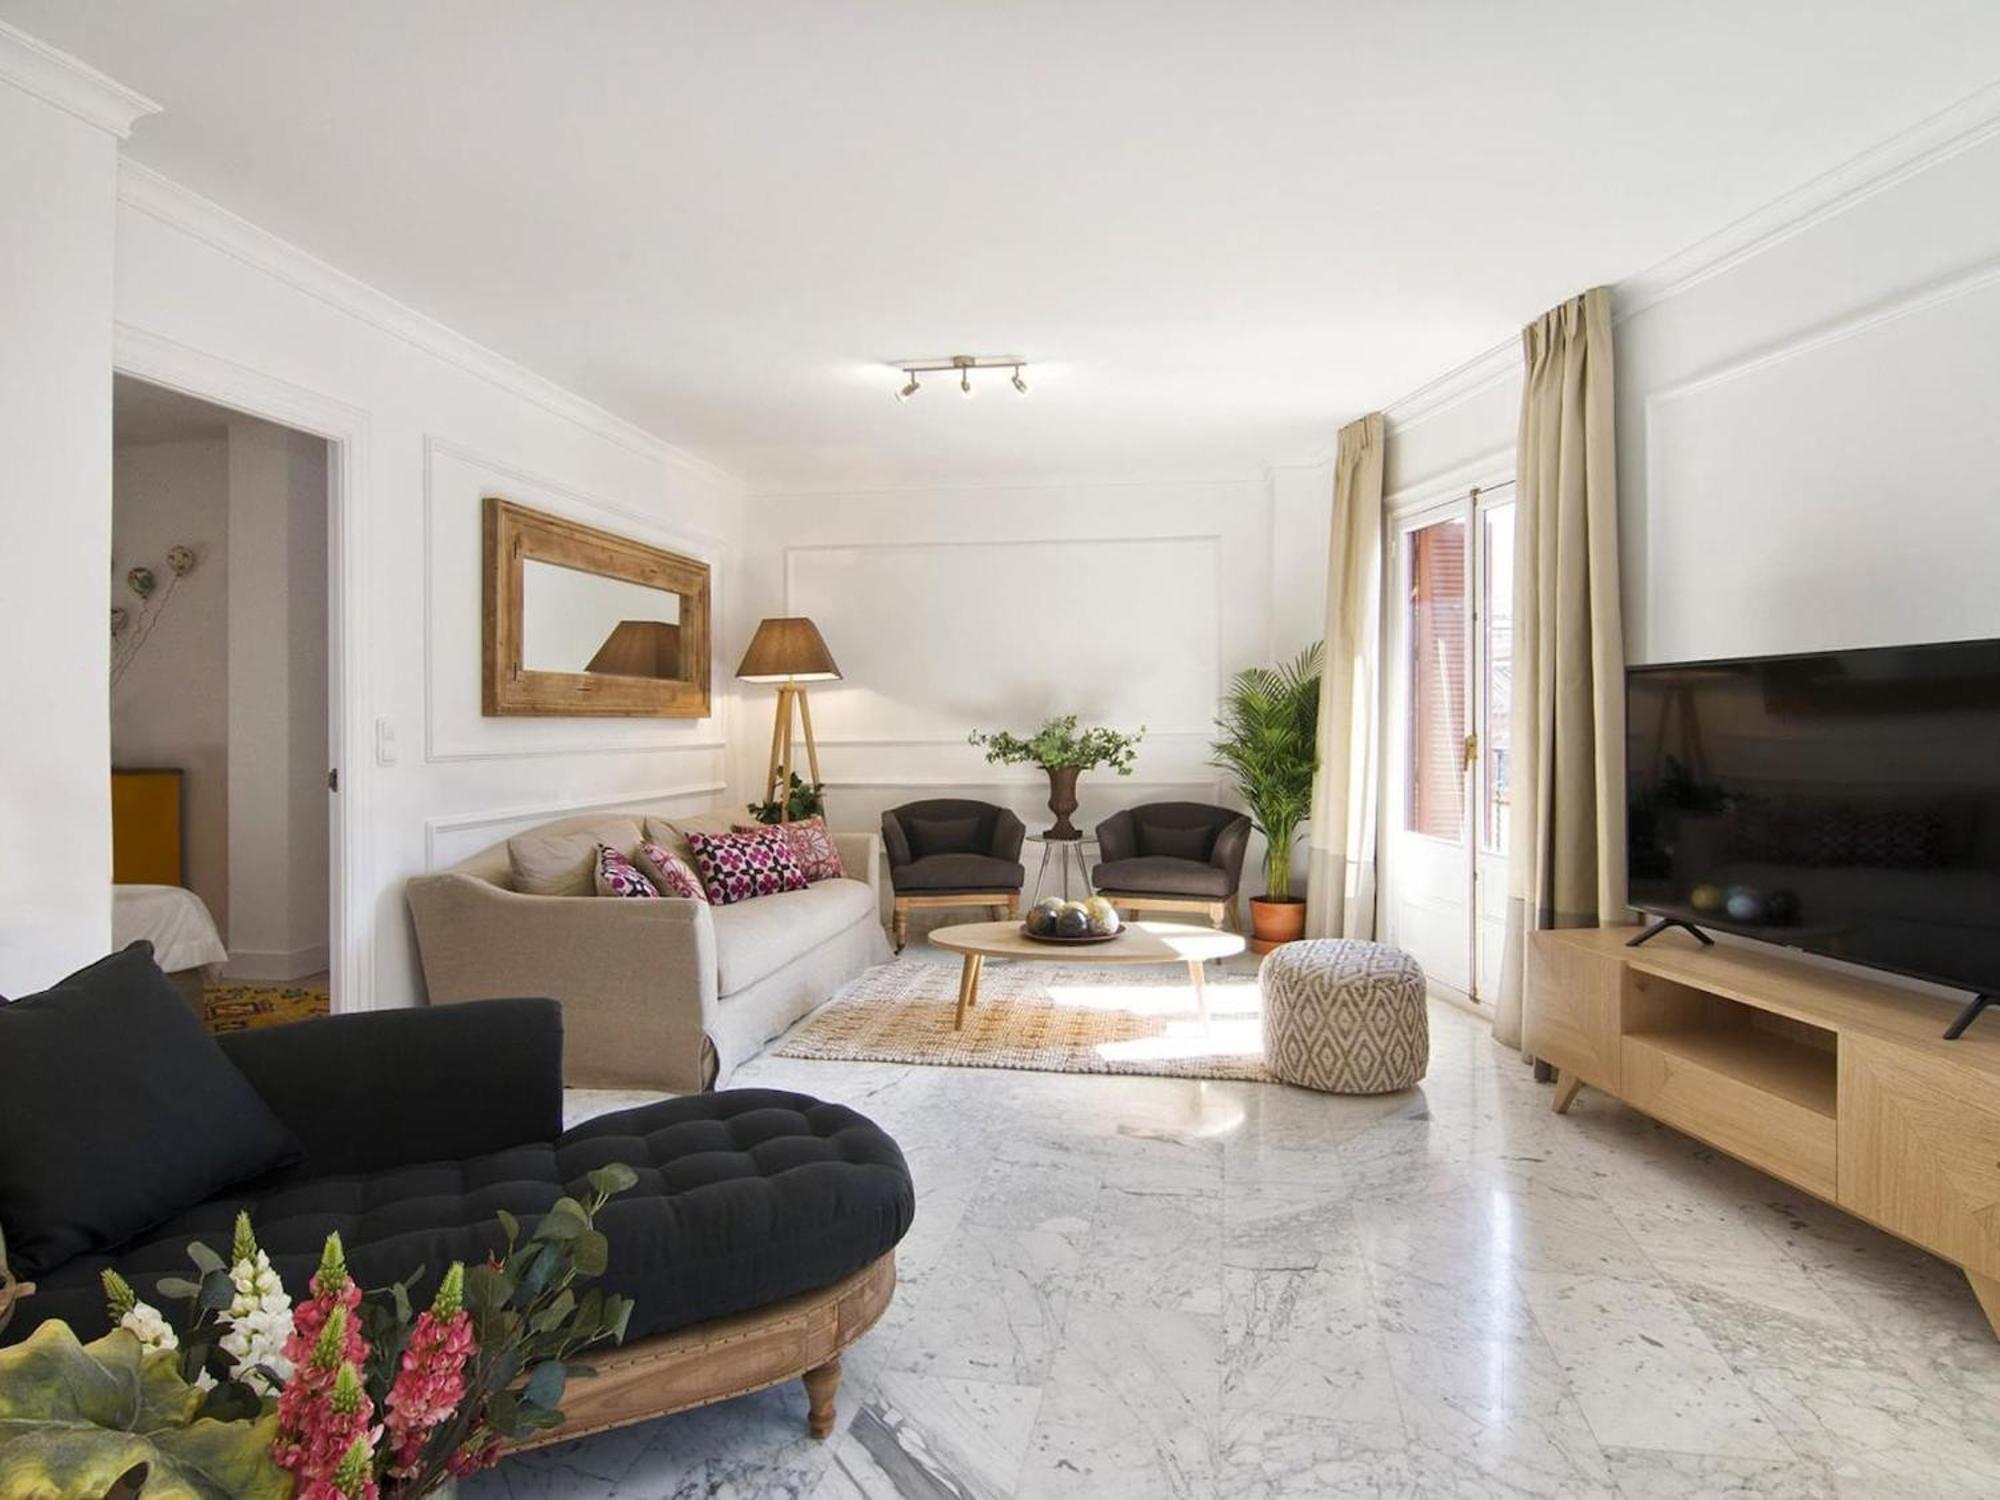 Chezmoihomes Glow And Elegant 4 Bedroom Apartment In The Heart Of Granada Parking Free 外观 照片